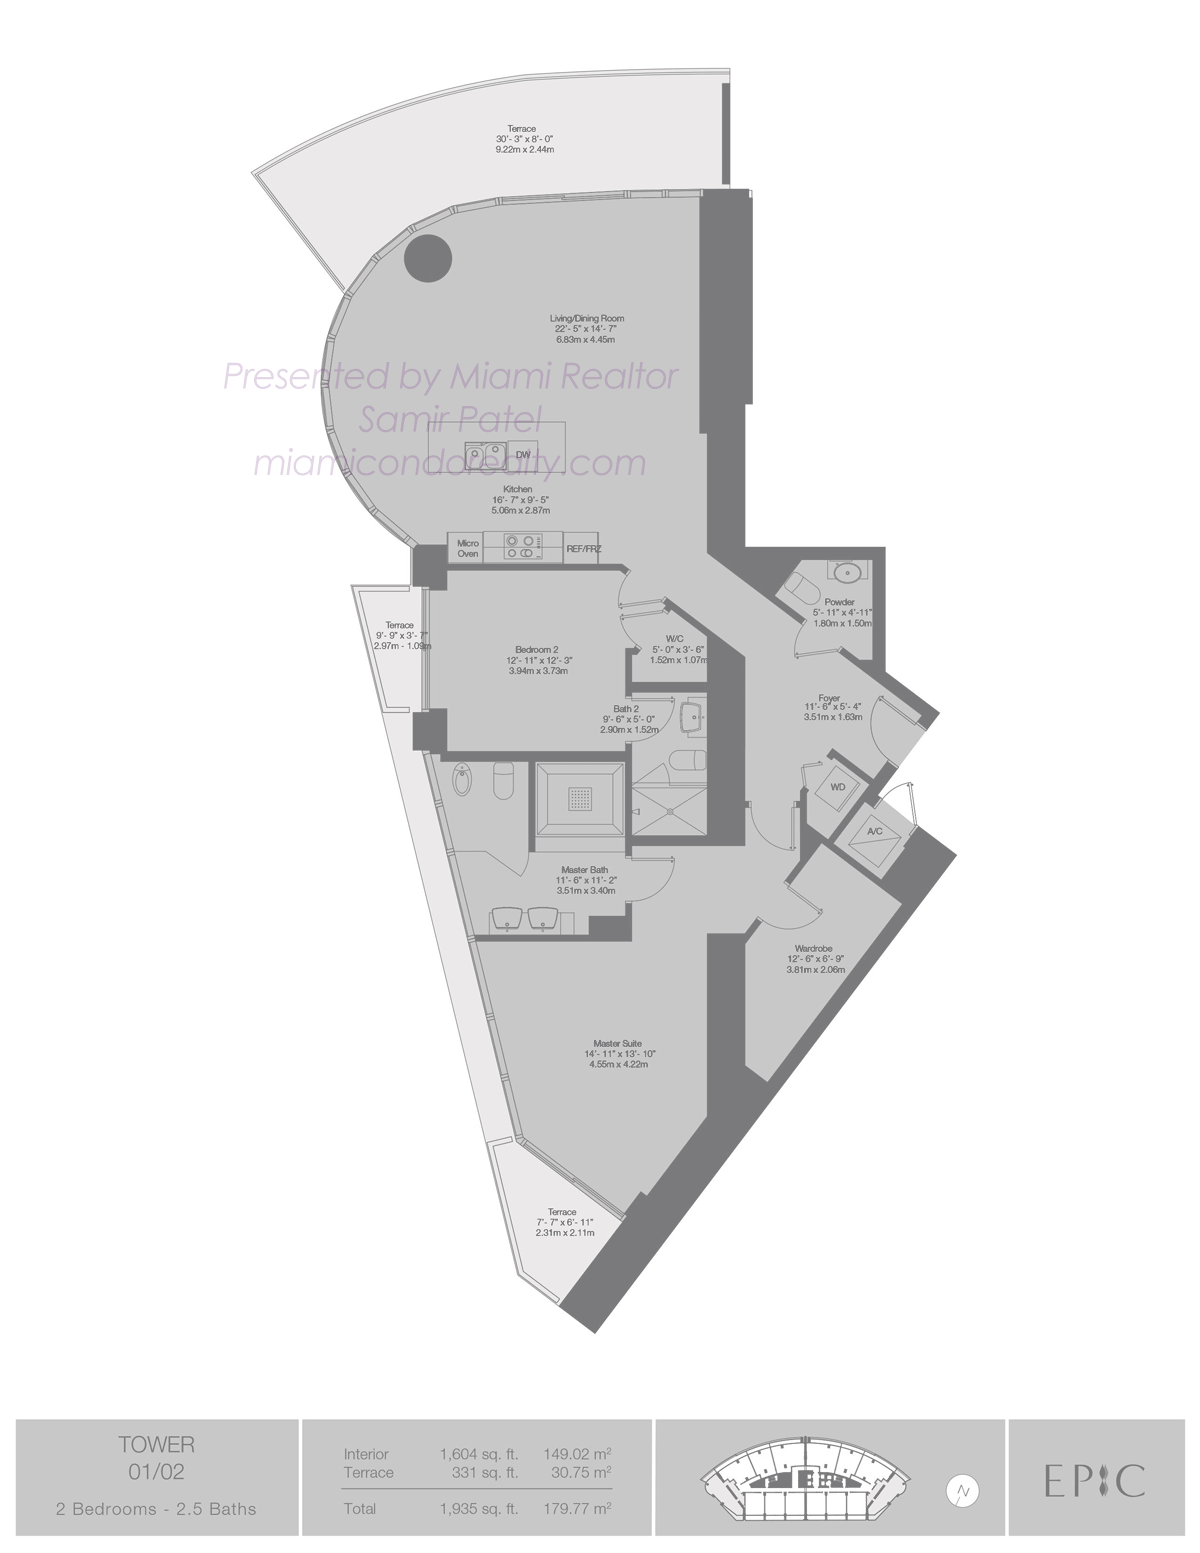 EPIC Residences Floorplans for 01 and 02 Lines